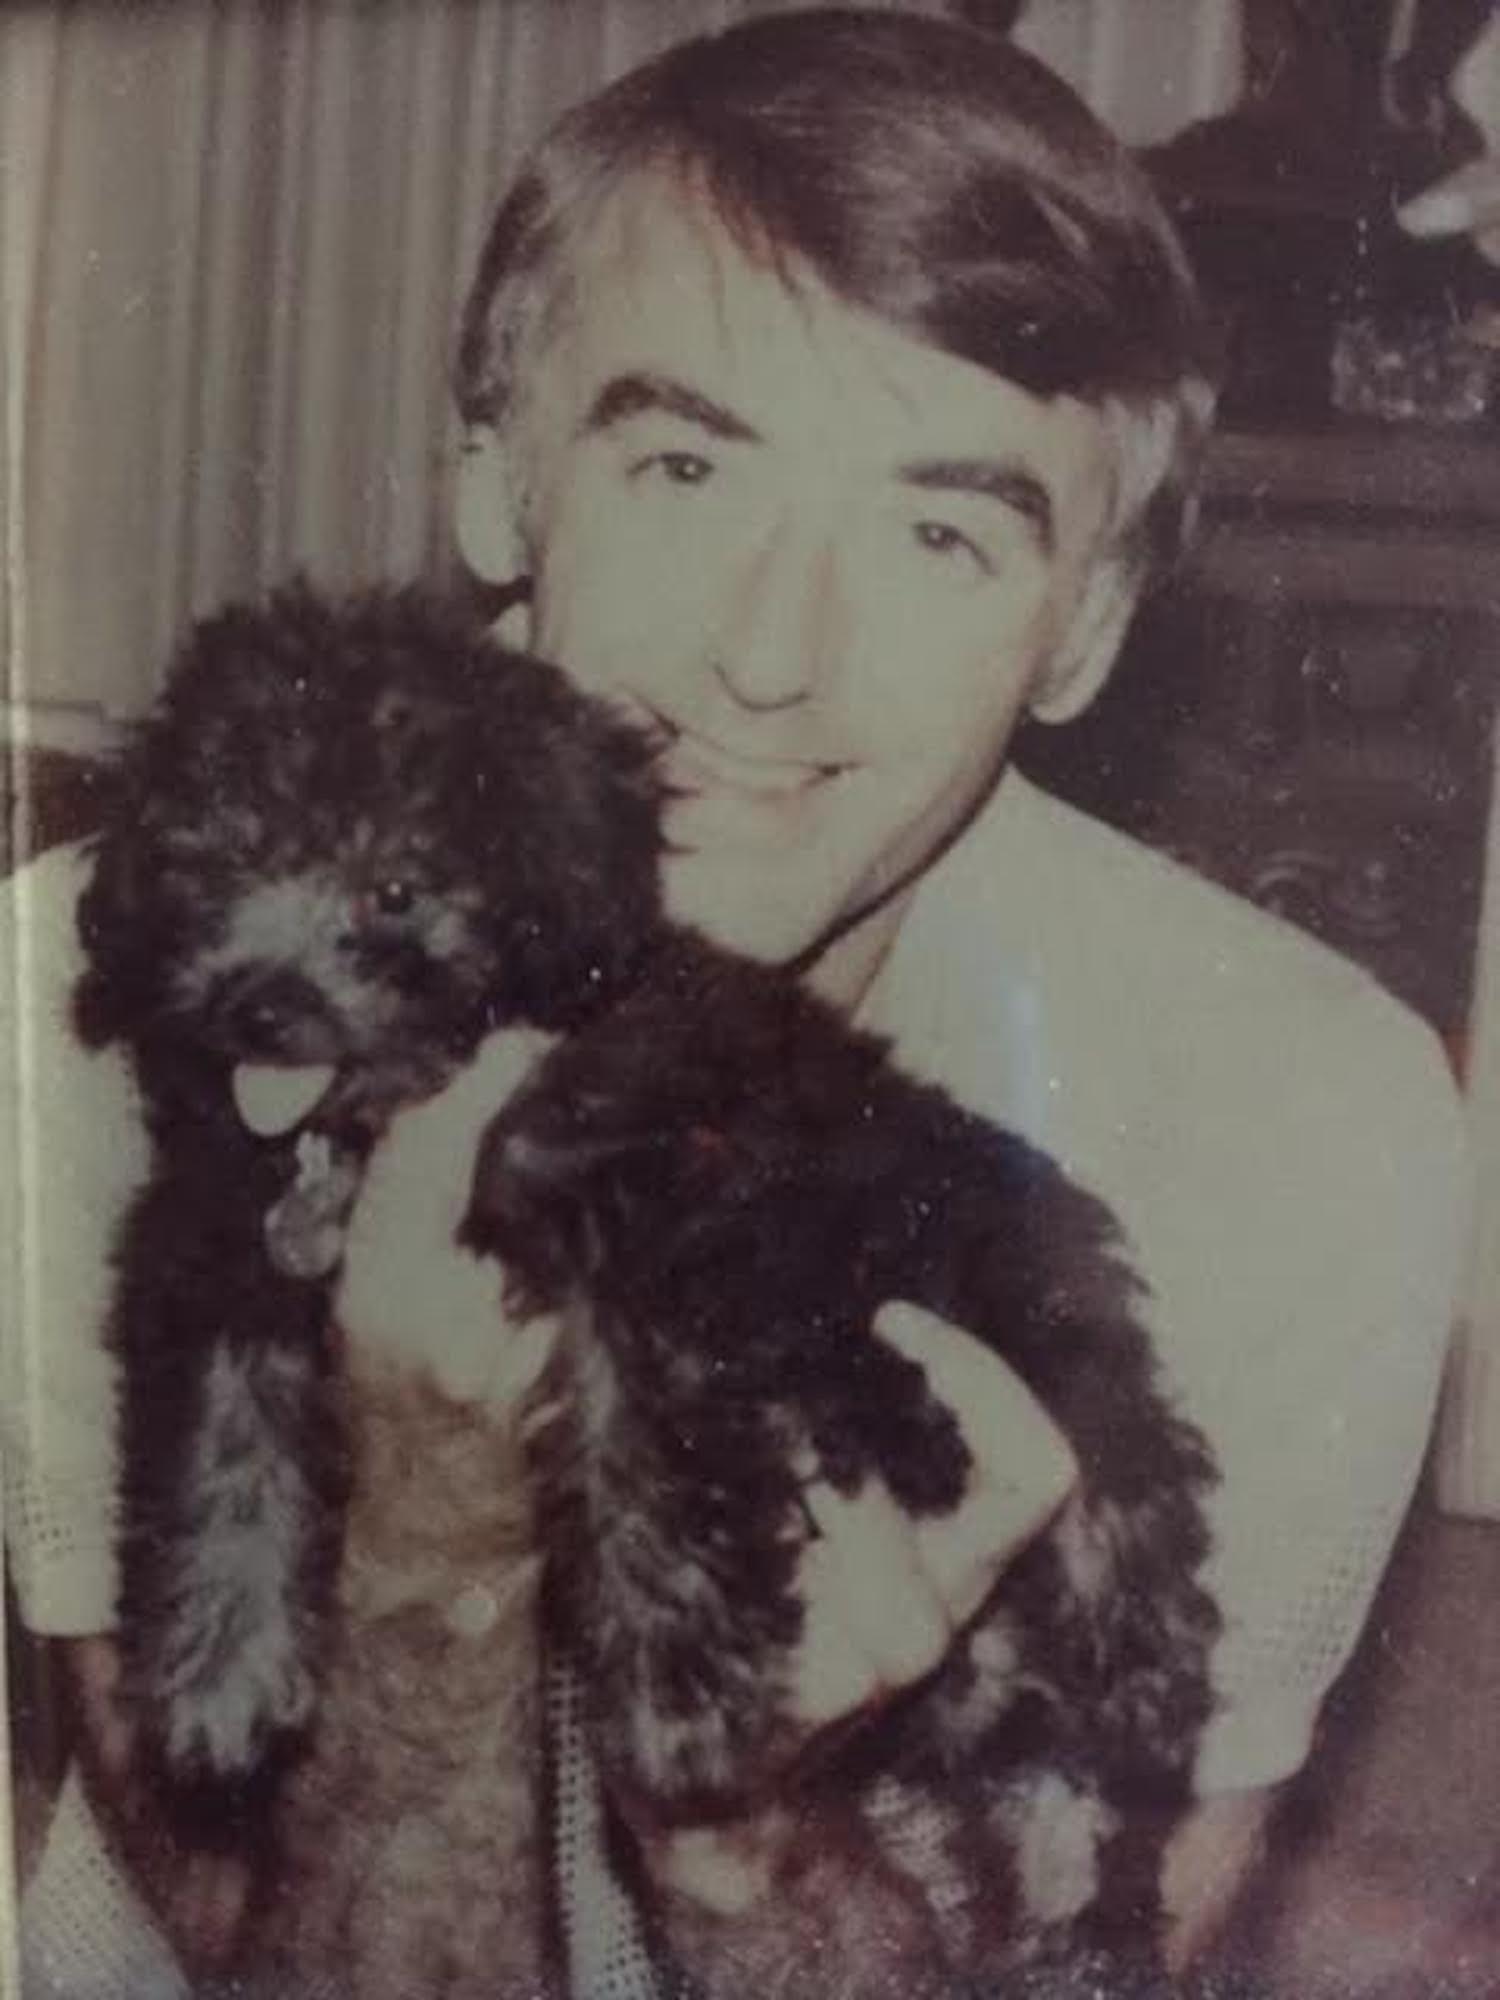 Court reporter Jerry L. Martin holding one of his beloved dogs.